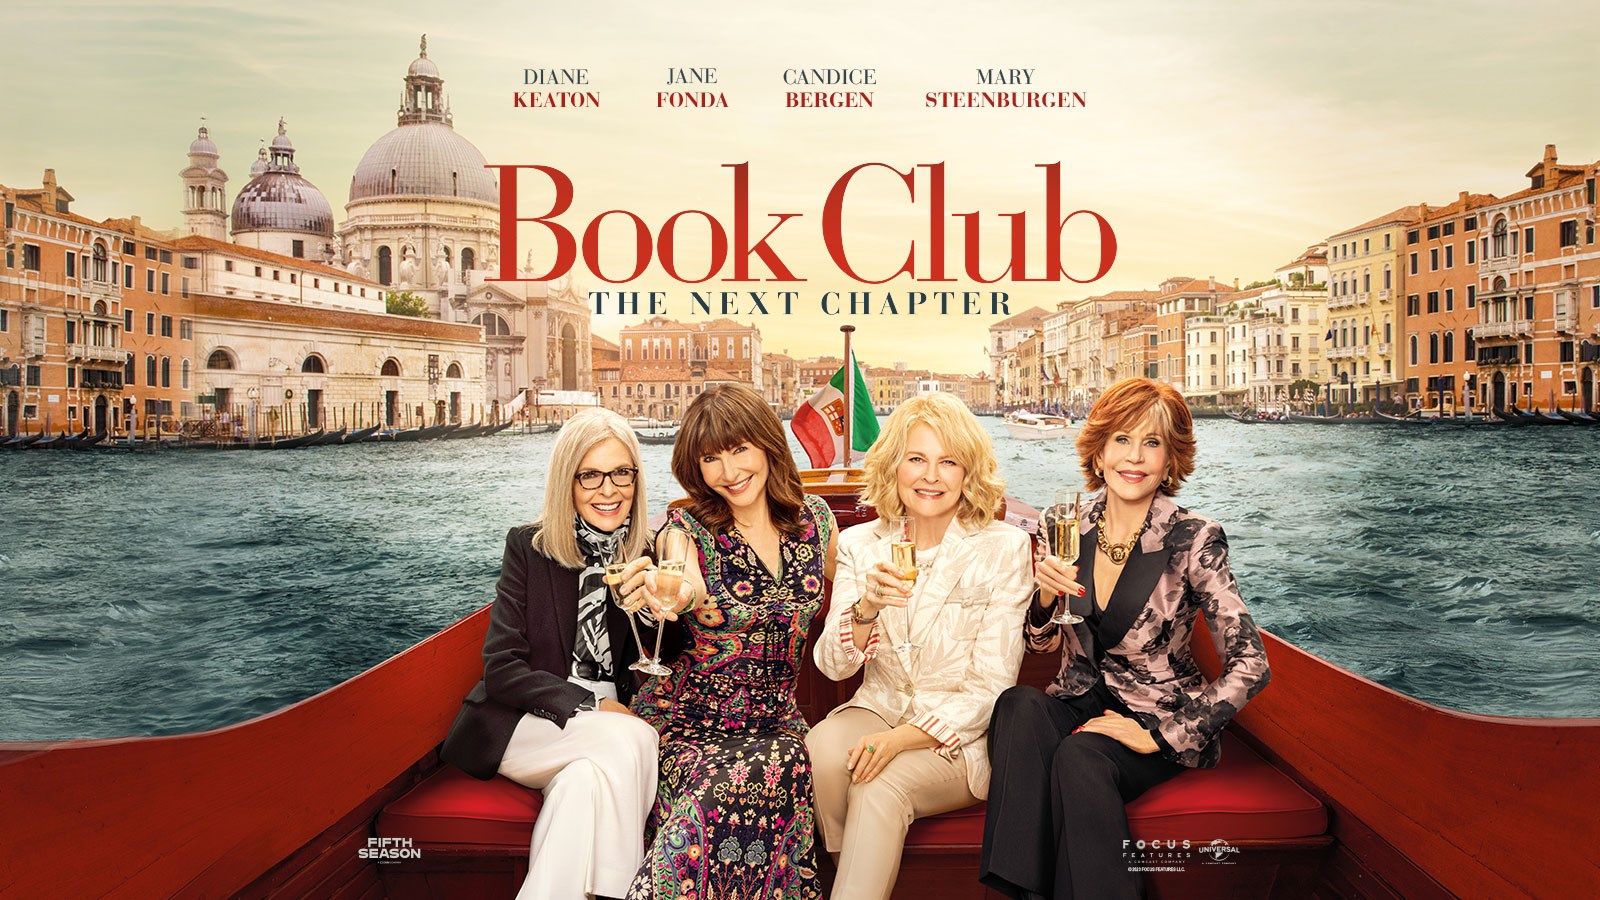 BOOK CLUB: THE NEXT CHAPTER